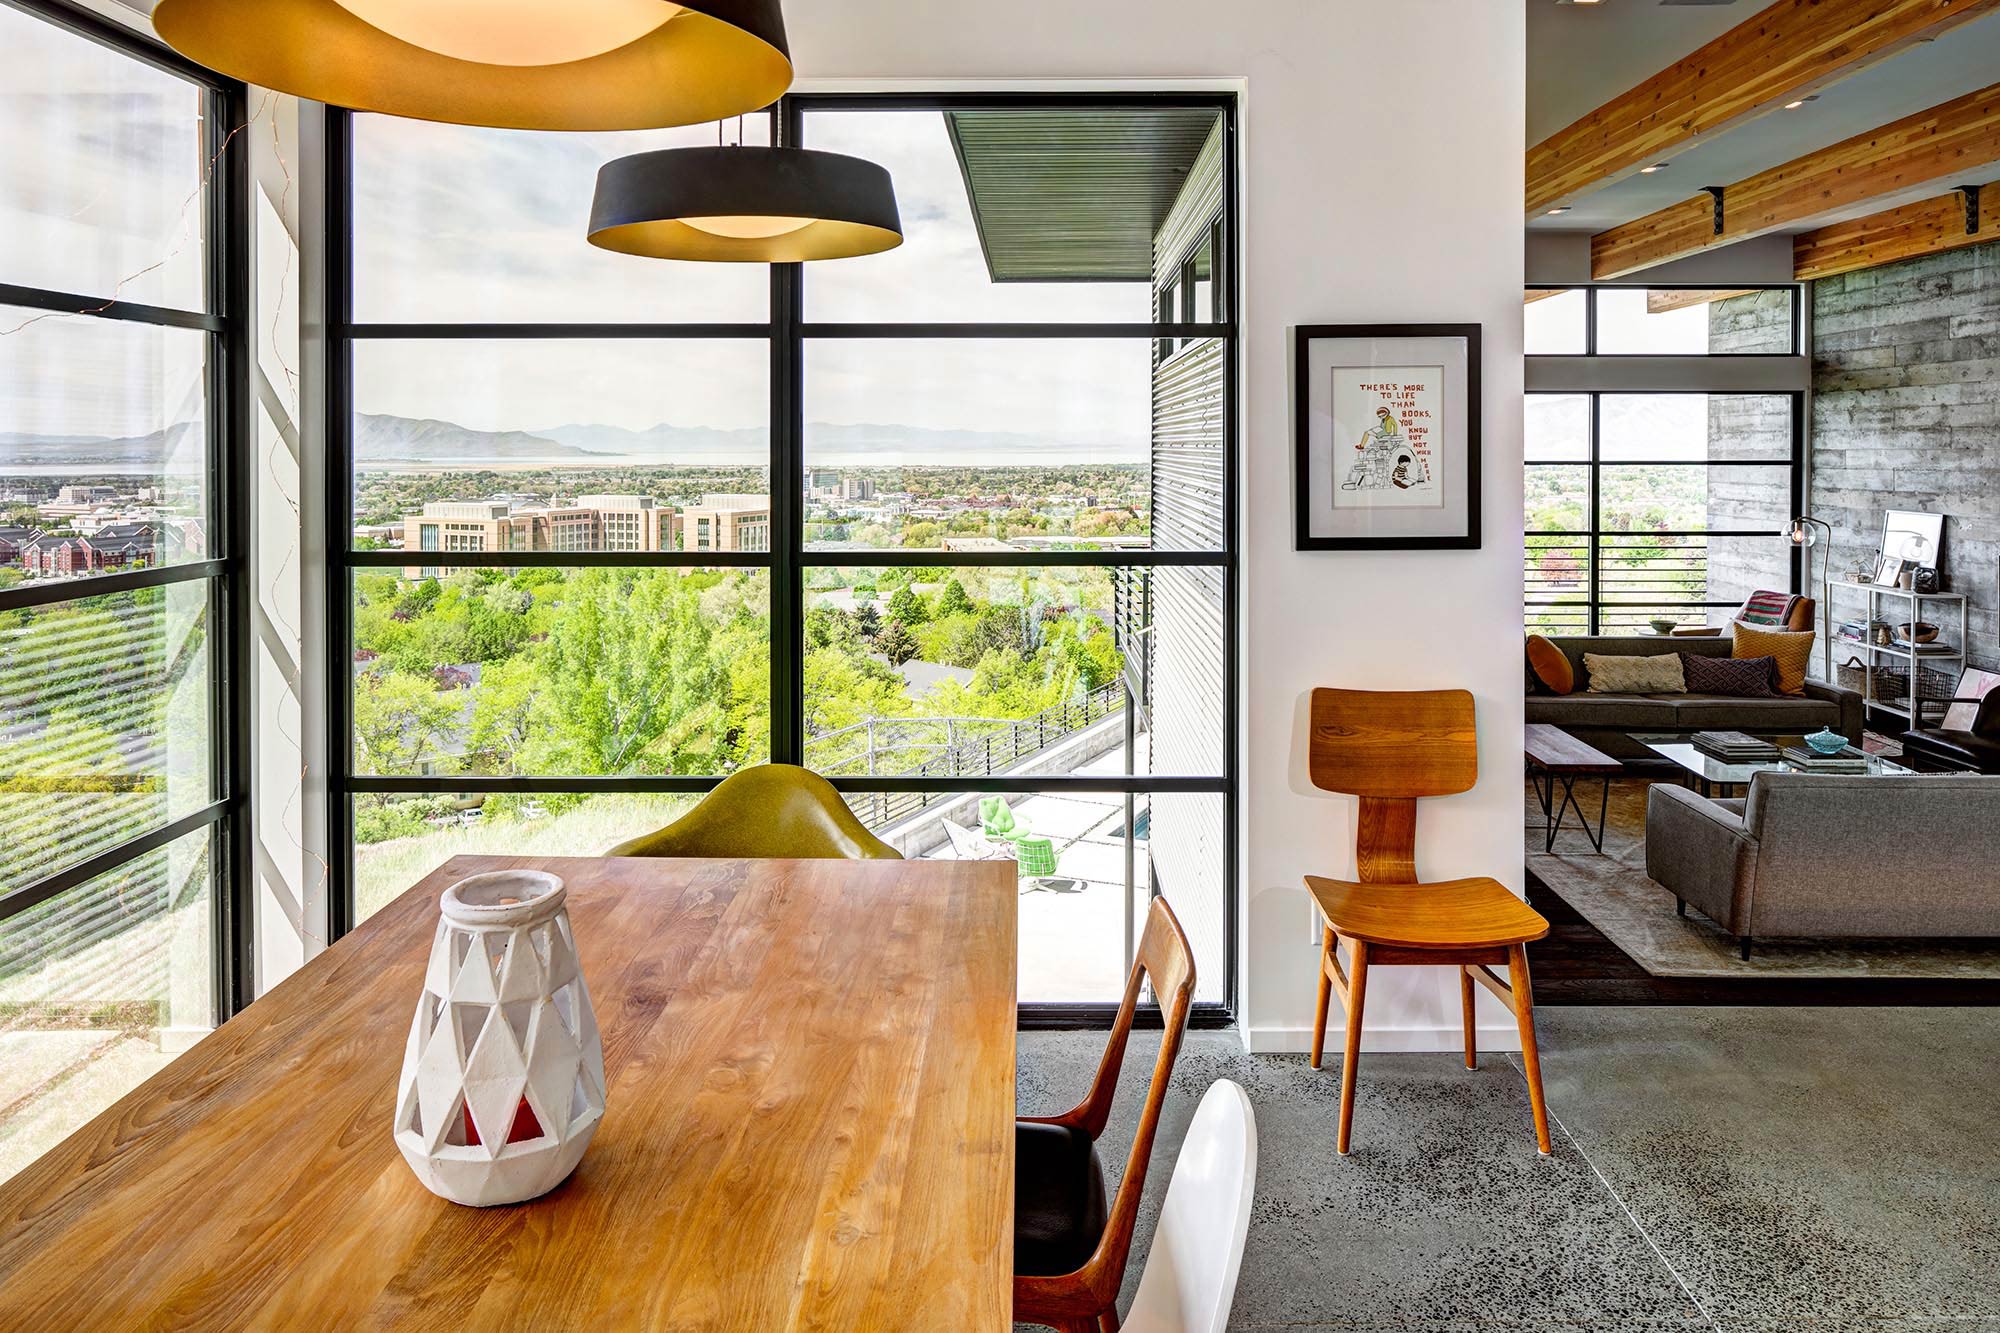 The window wall in this dining area provides beautiful views of the neighborhood with trees.